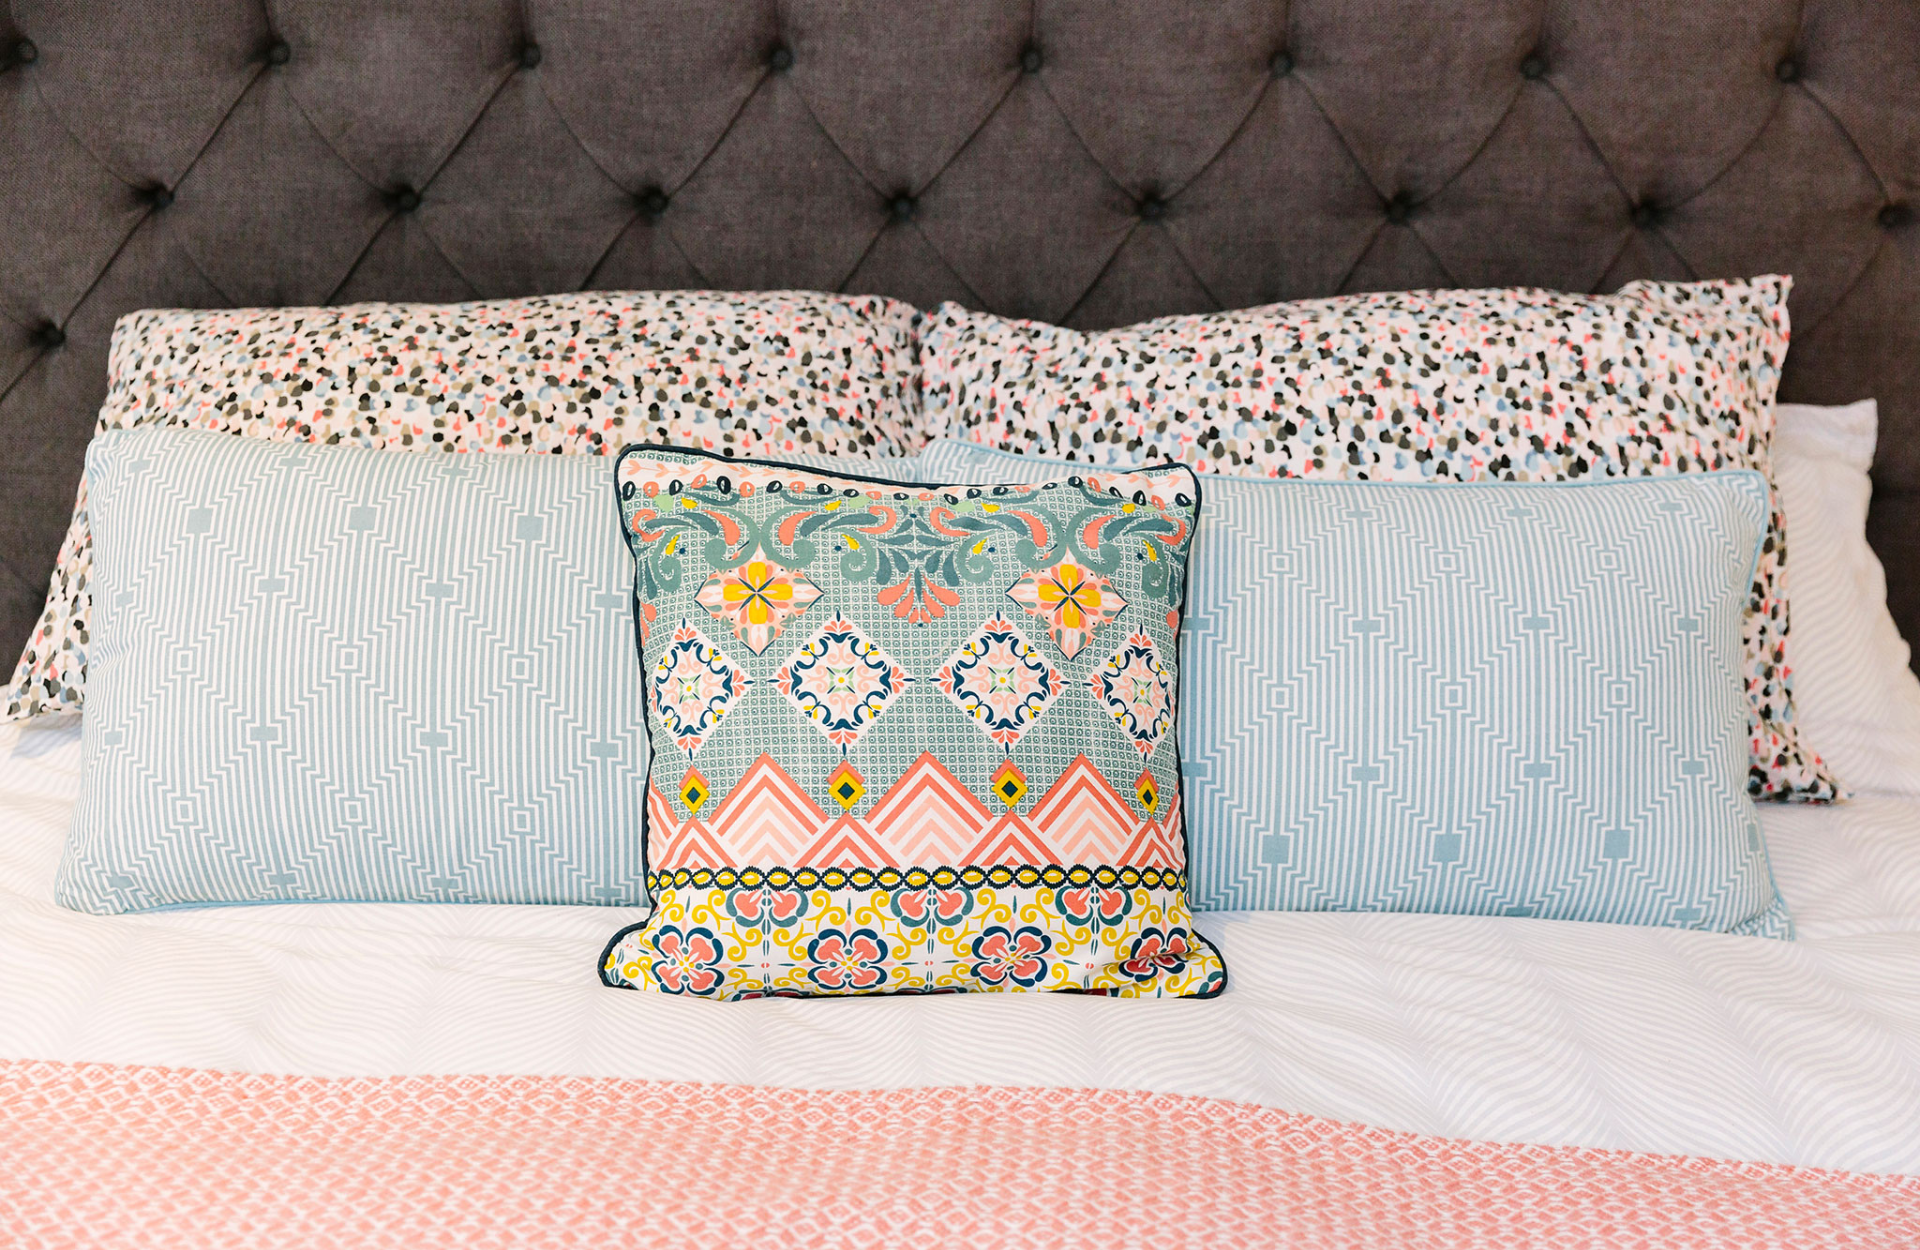 Patterned pillows